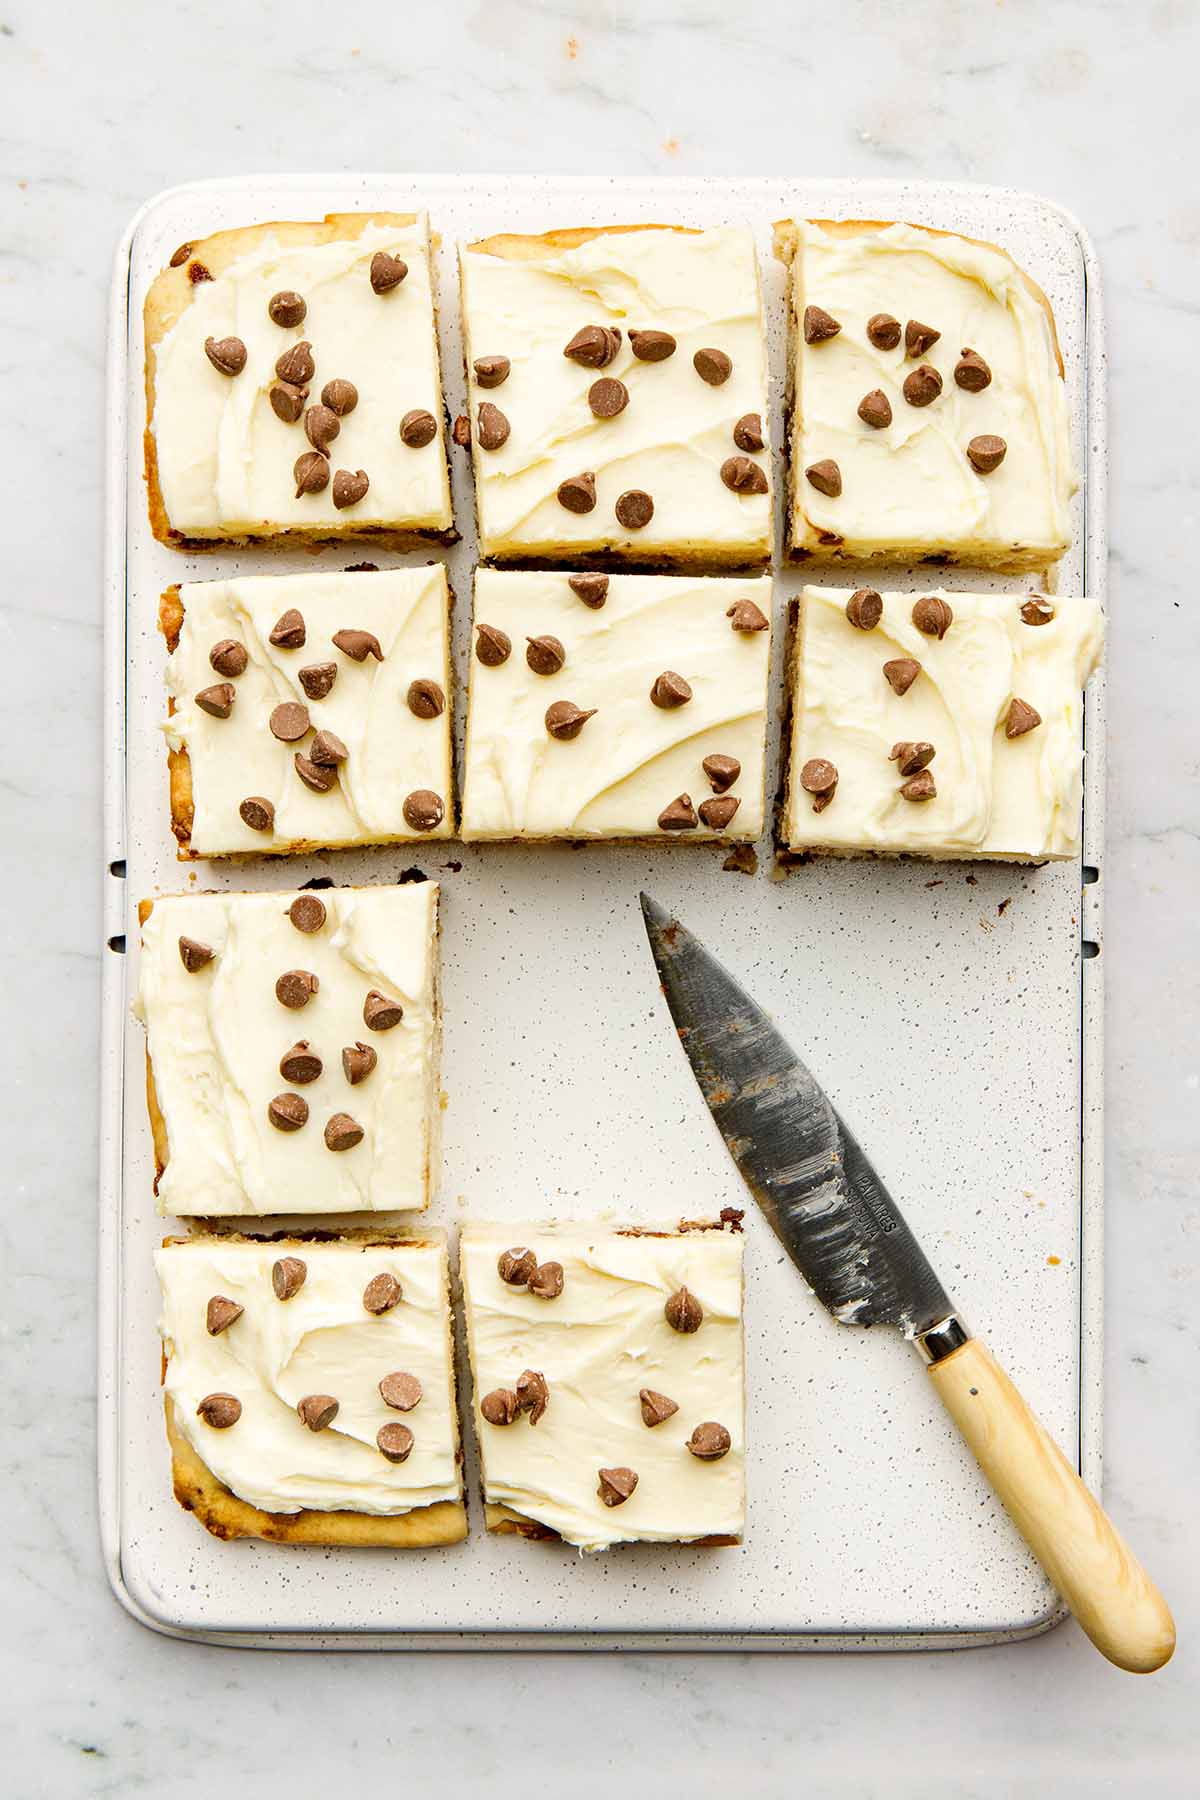 Chocolate chip-topped frosted cake cut into squares, top down view.